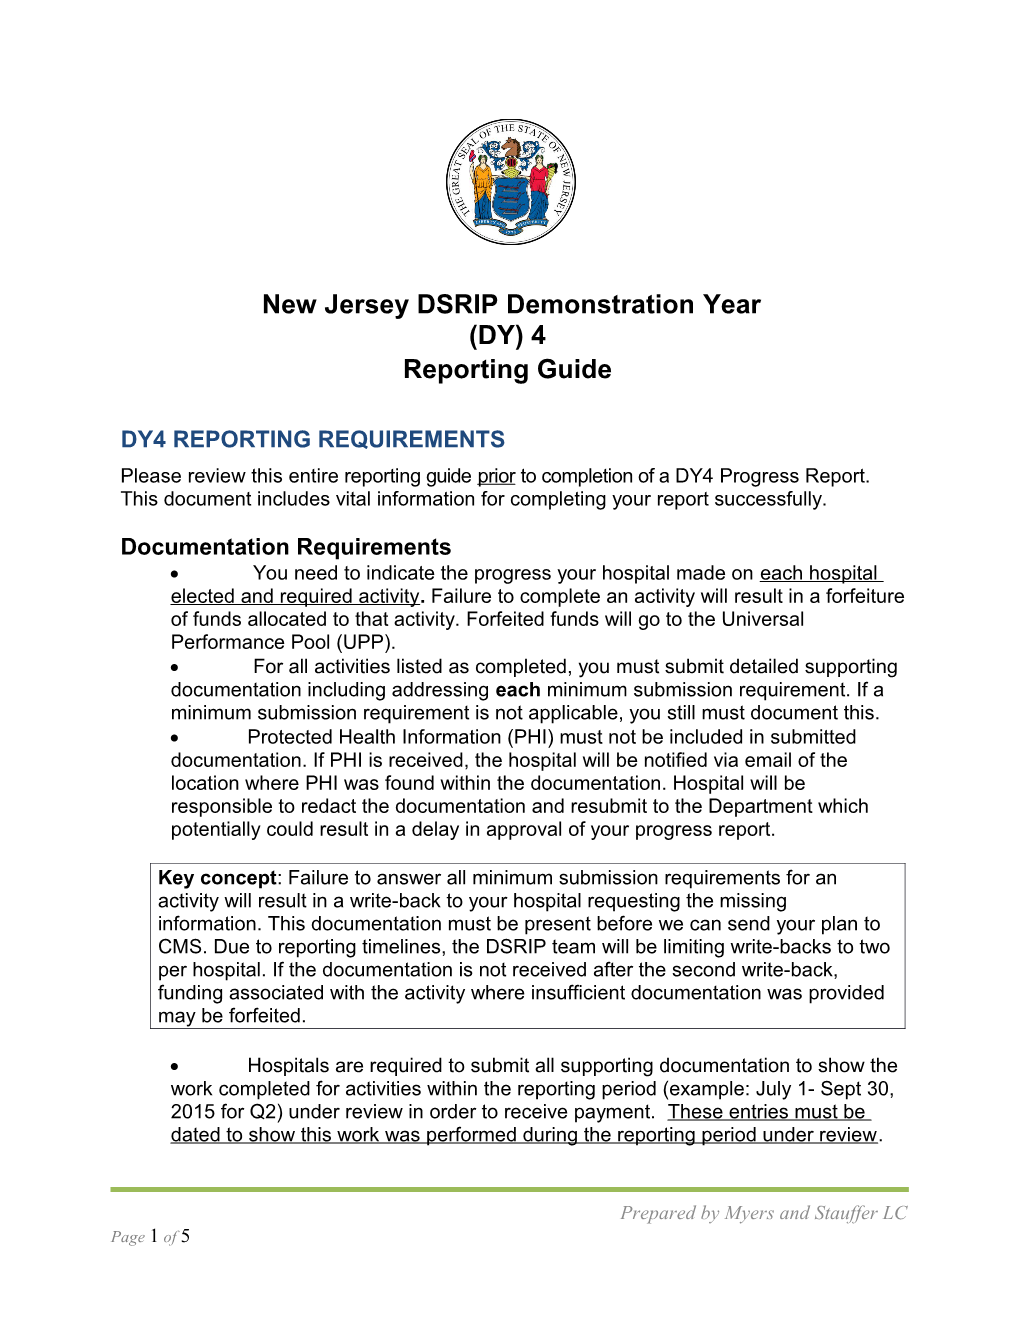 New Jersey DSRIP Demonstration Year (DY) 4